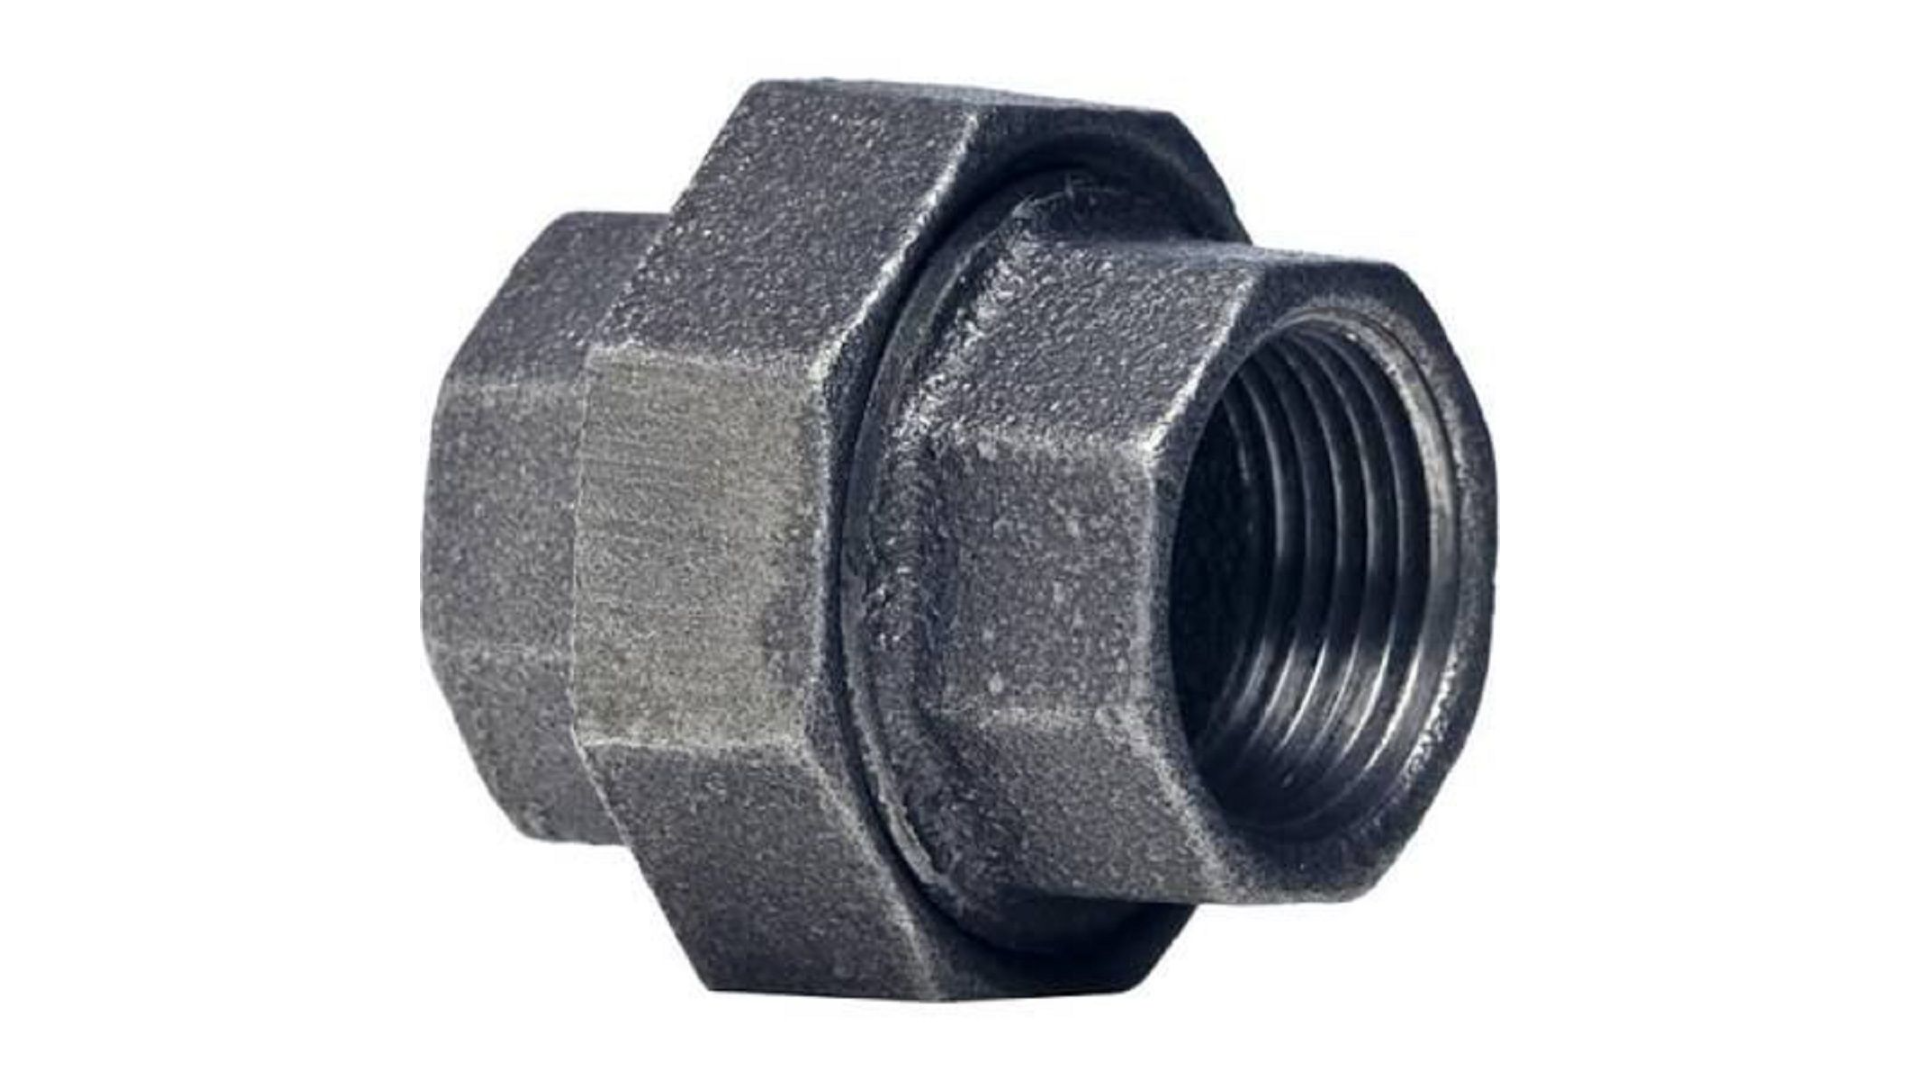 521-703 BLK PIPE UNION 1/2 - Iron Pipe and Fittings